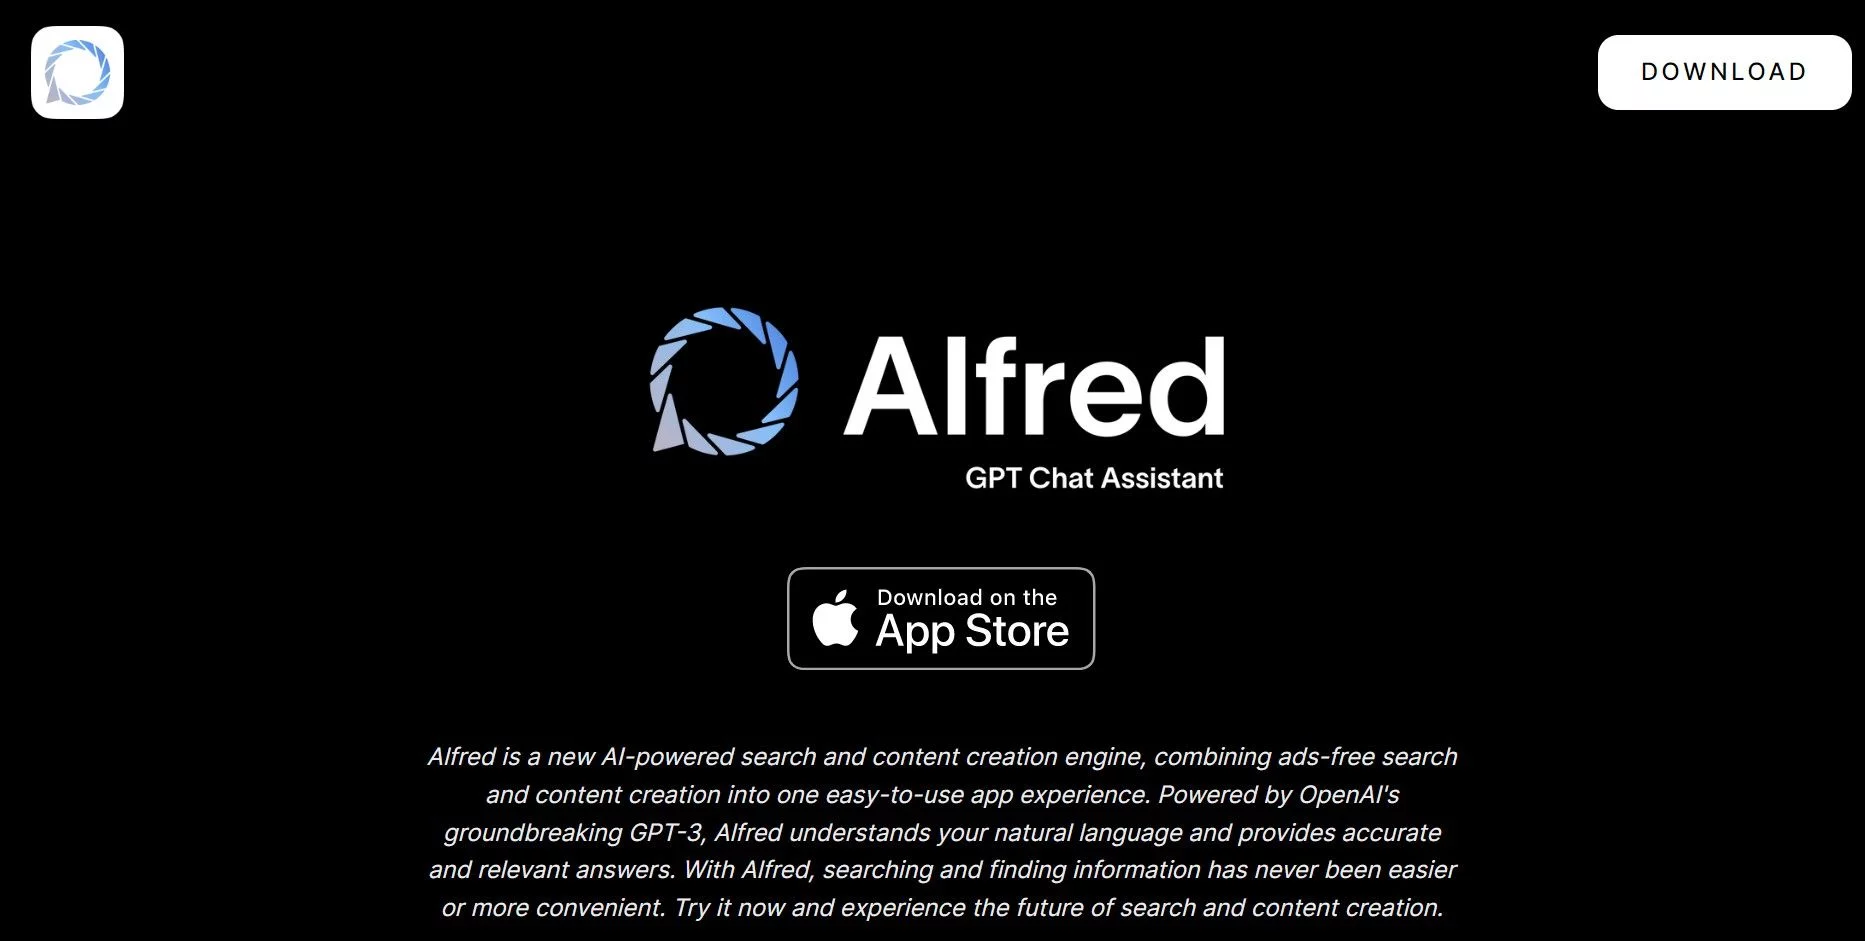  Alfred is an AI-powered search & content creation